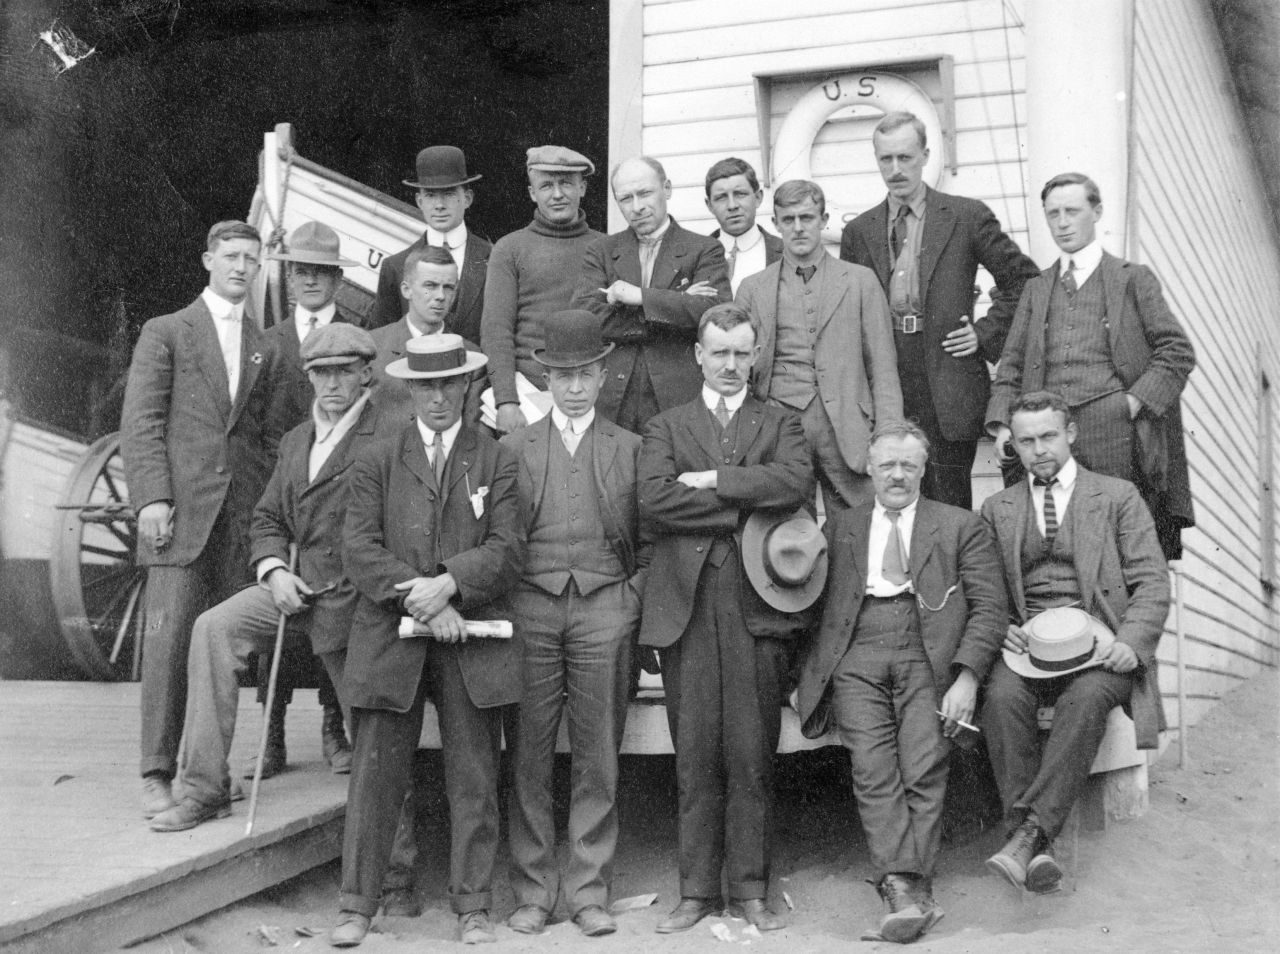 In this expedition photo which was taken before shipping out, Vilhjalmur Stefansson (front row, third from the left) was joined by his secretary Burt McConnell, (middle row, second from left) and the ship's captain, Robert Bartlett (front row, second from left). 